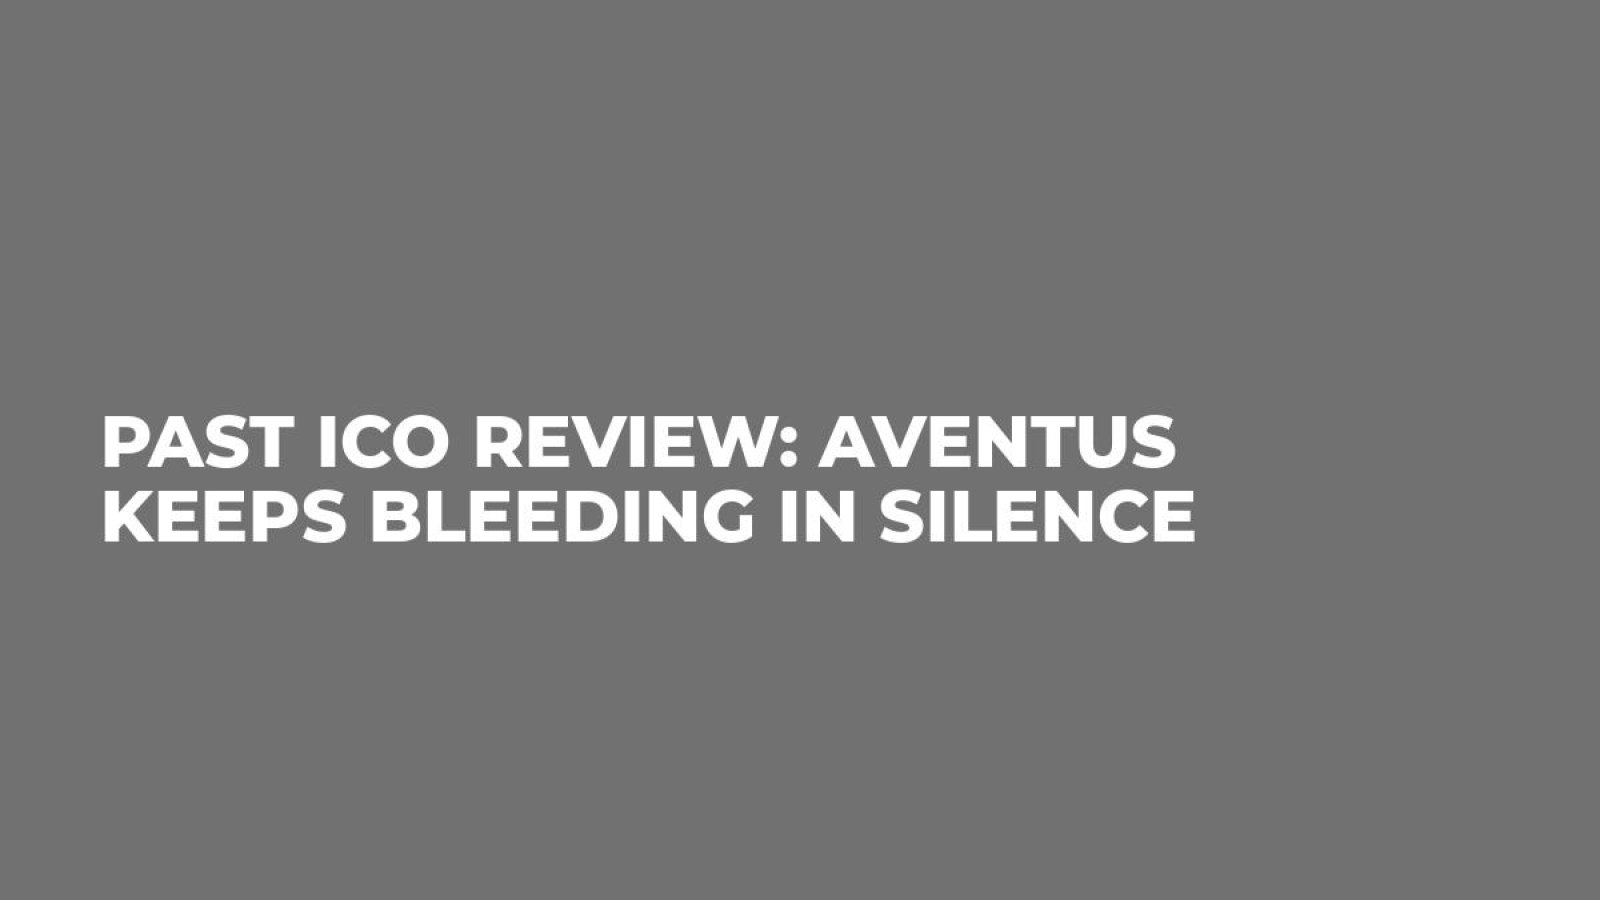 Past ICO Review: Aventus Keeps Bleeding in Silence